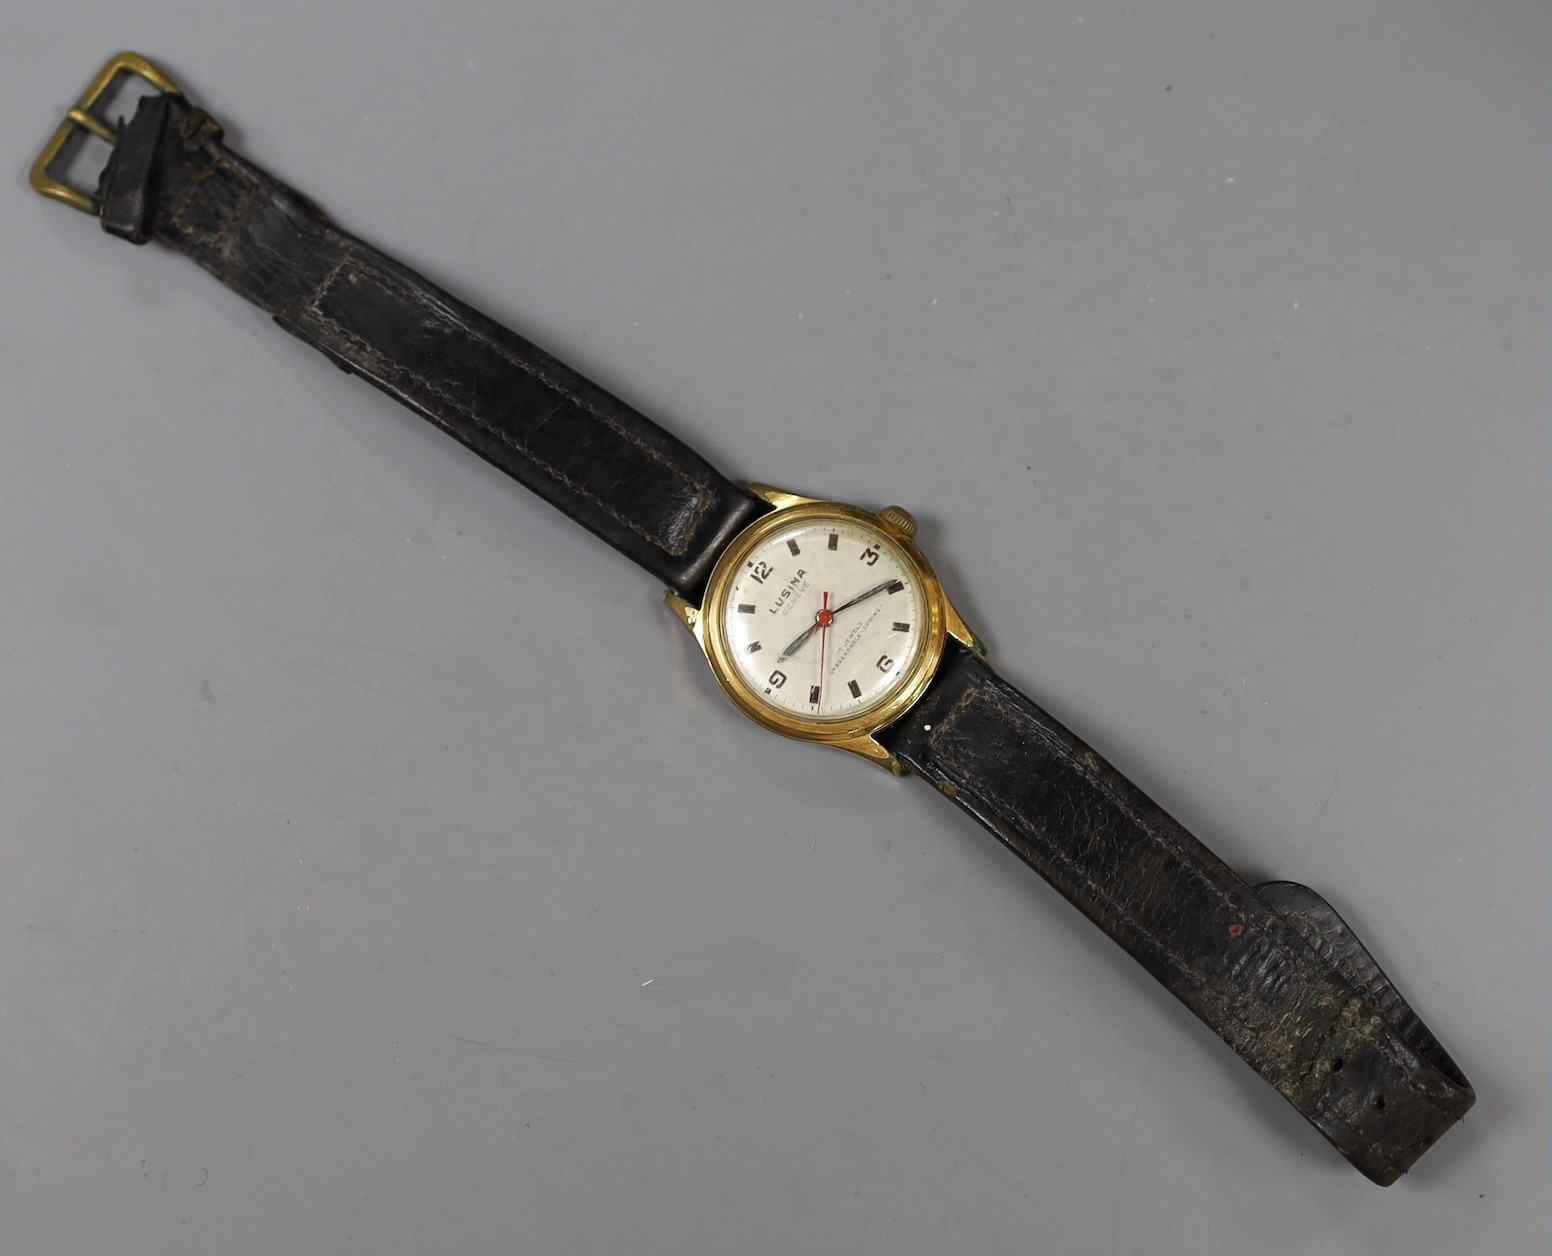 A steel and gold plated boy's size Lusina manual wind wrist watch, on leather strap.